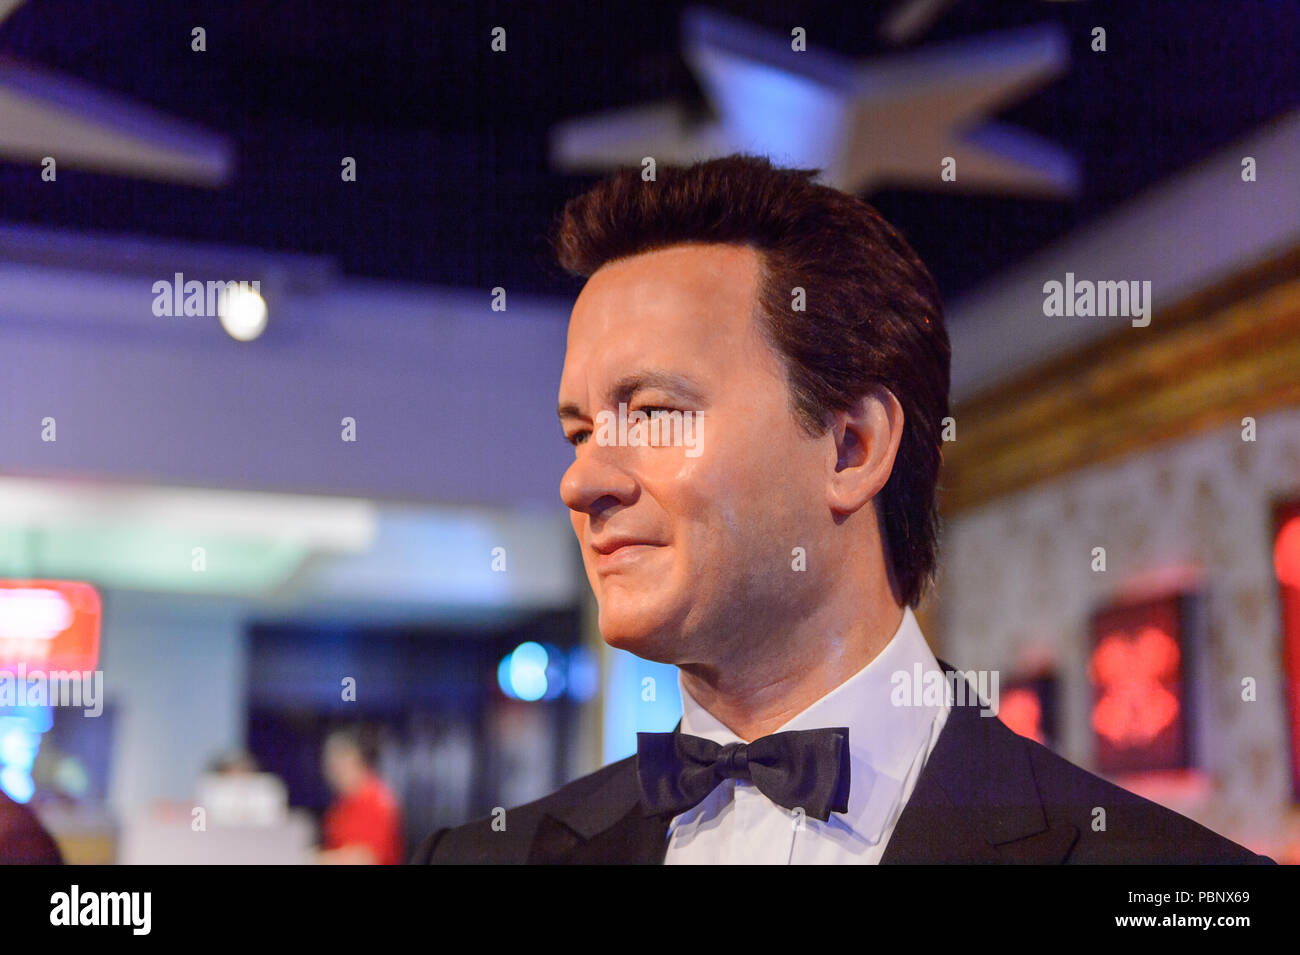 LONDON, ENGLAND - JULY 22, 2016: Tom Hanks, American actor and filmmaker, Madame Tussauds wax museum. It is a major tourist attraction in London Stock Photo